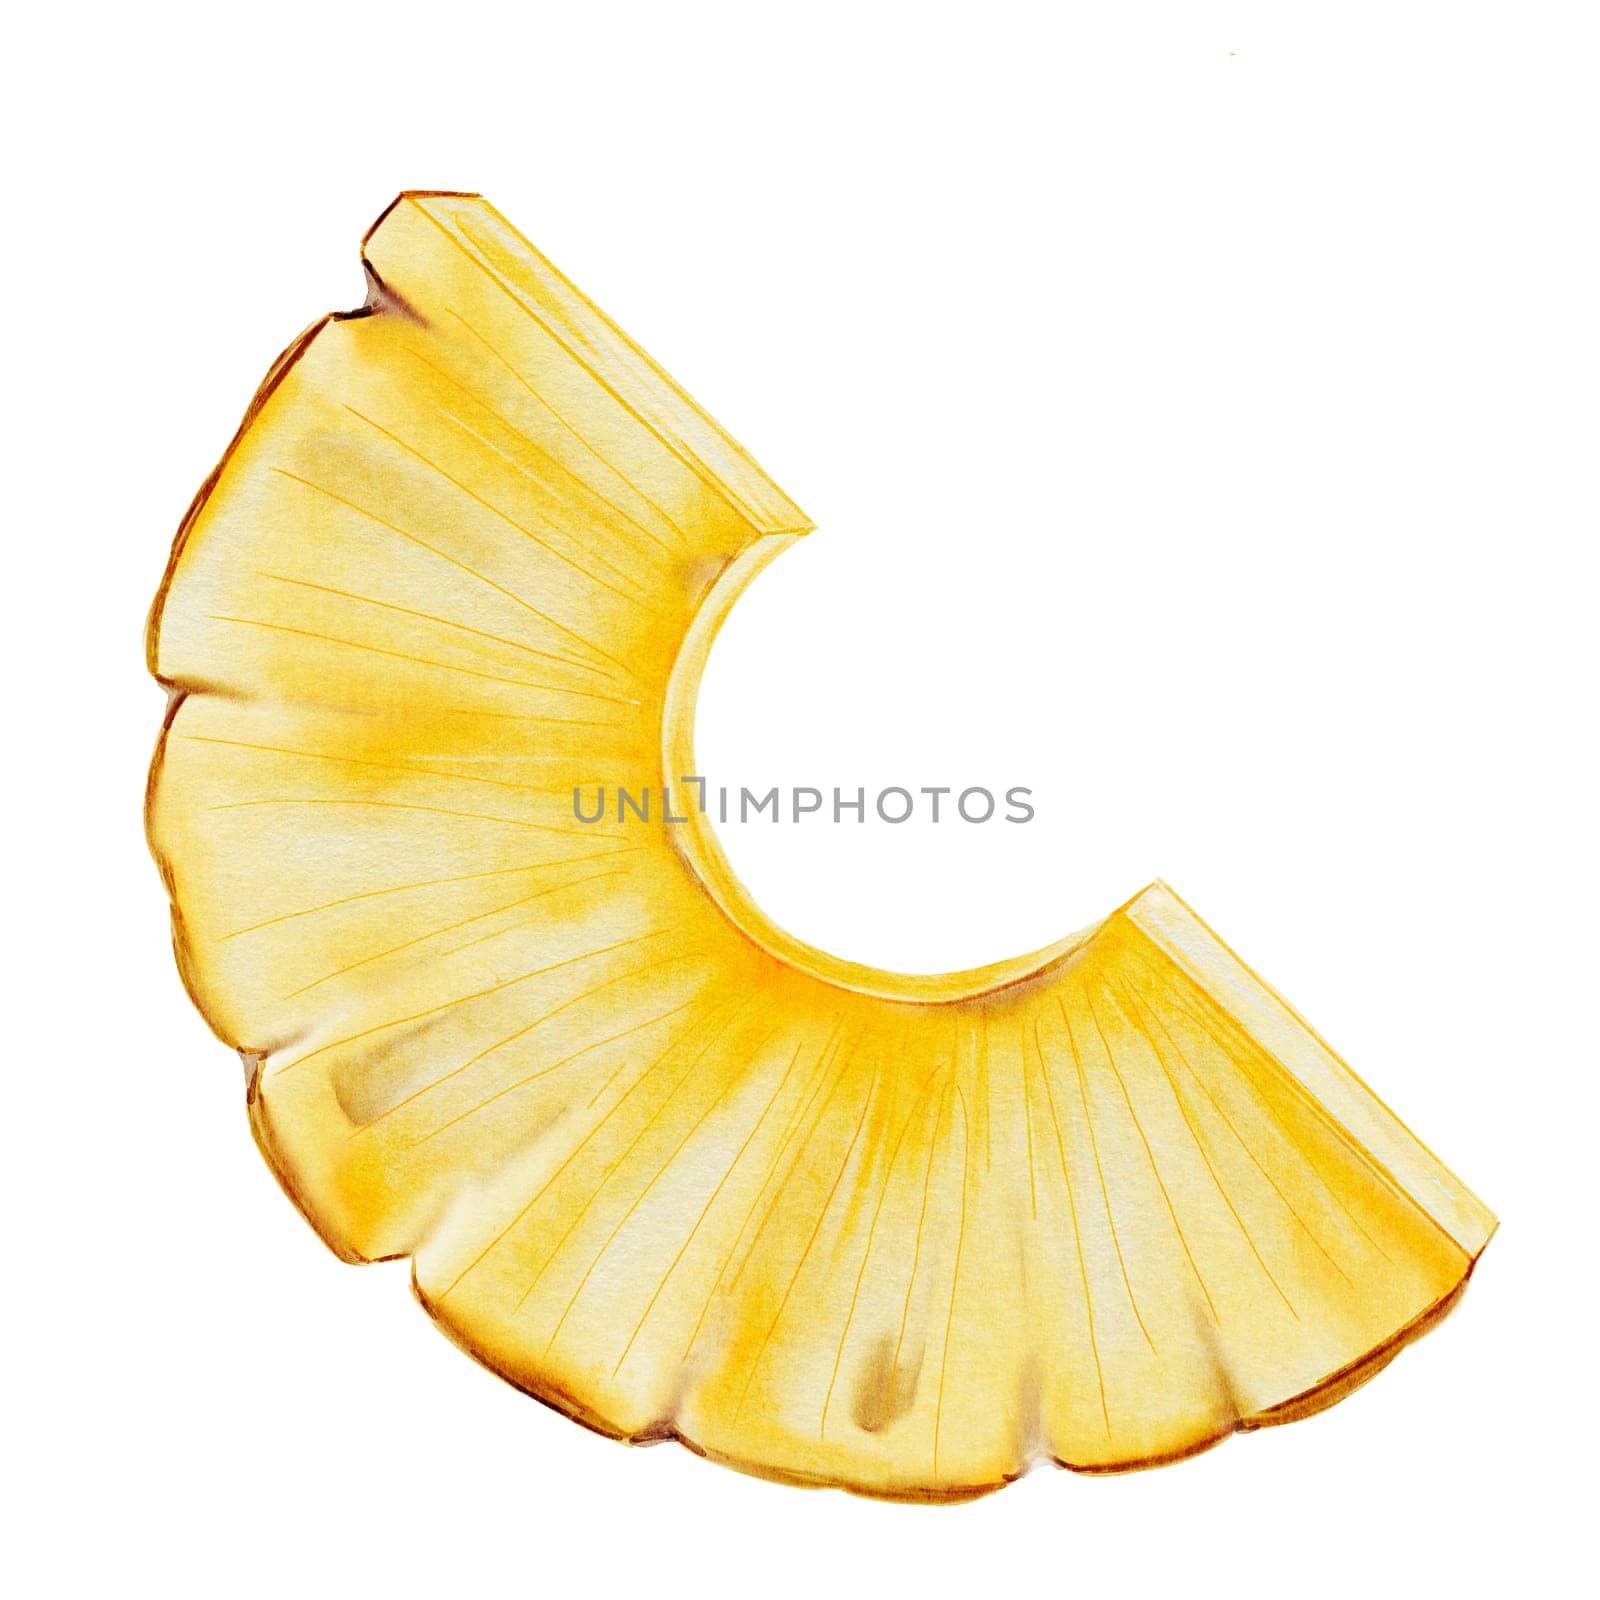 Pineapple slice watercolor. Hand drawn isolated drawing on white background. Clip art of ripe tropical fruit. For the design of exotic cocktail menus and cosmetics packaging. Food illustration. High quality photo